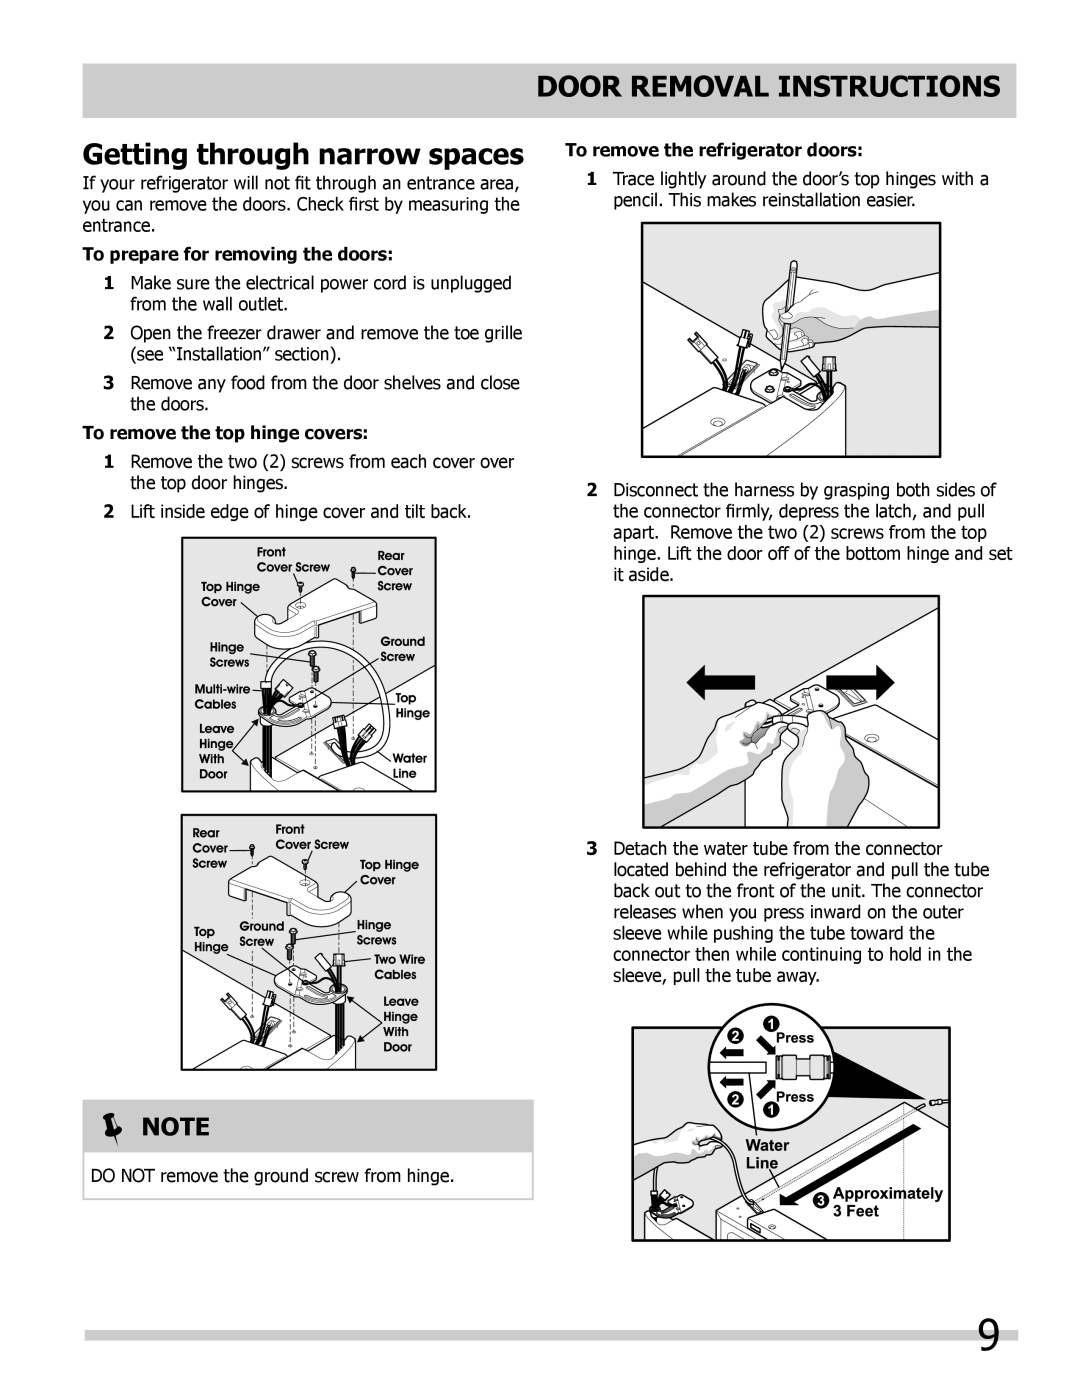 Frigidaire 242046800 Door Removal Instructions, Getting through narrow spaces, To prepare for removing the doors,  Note 